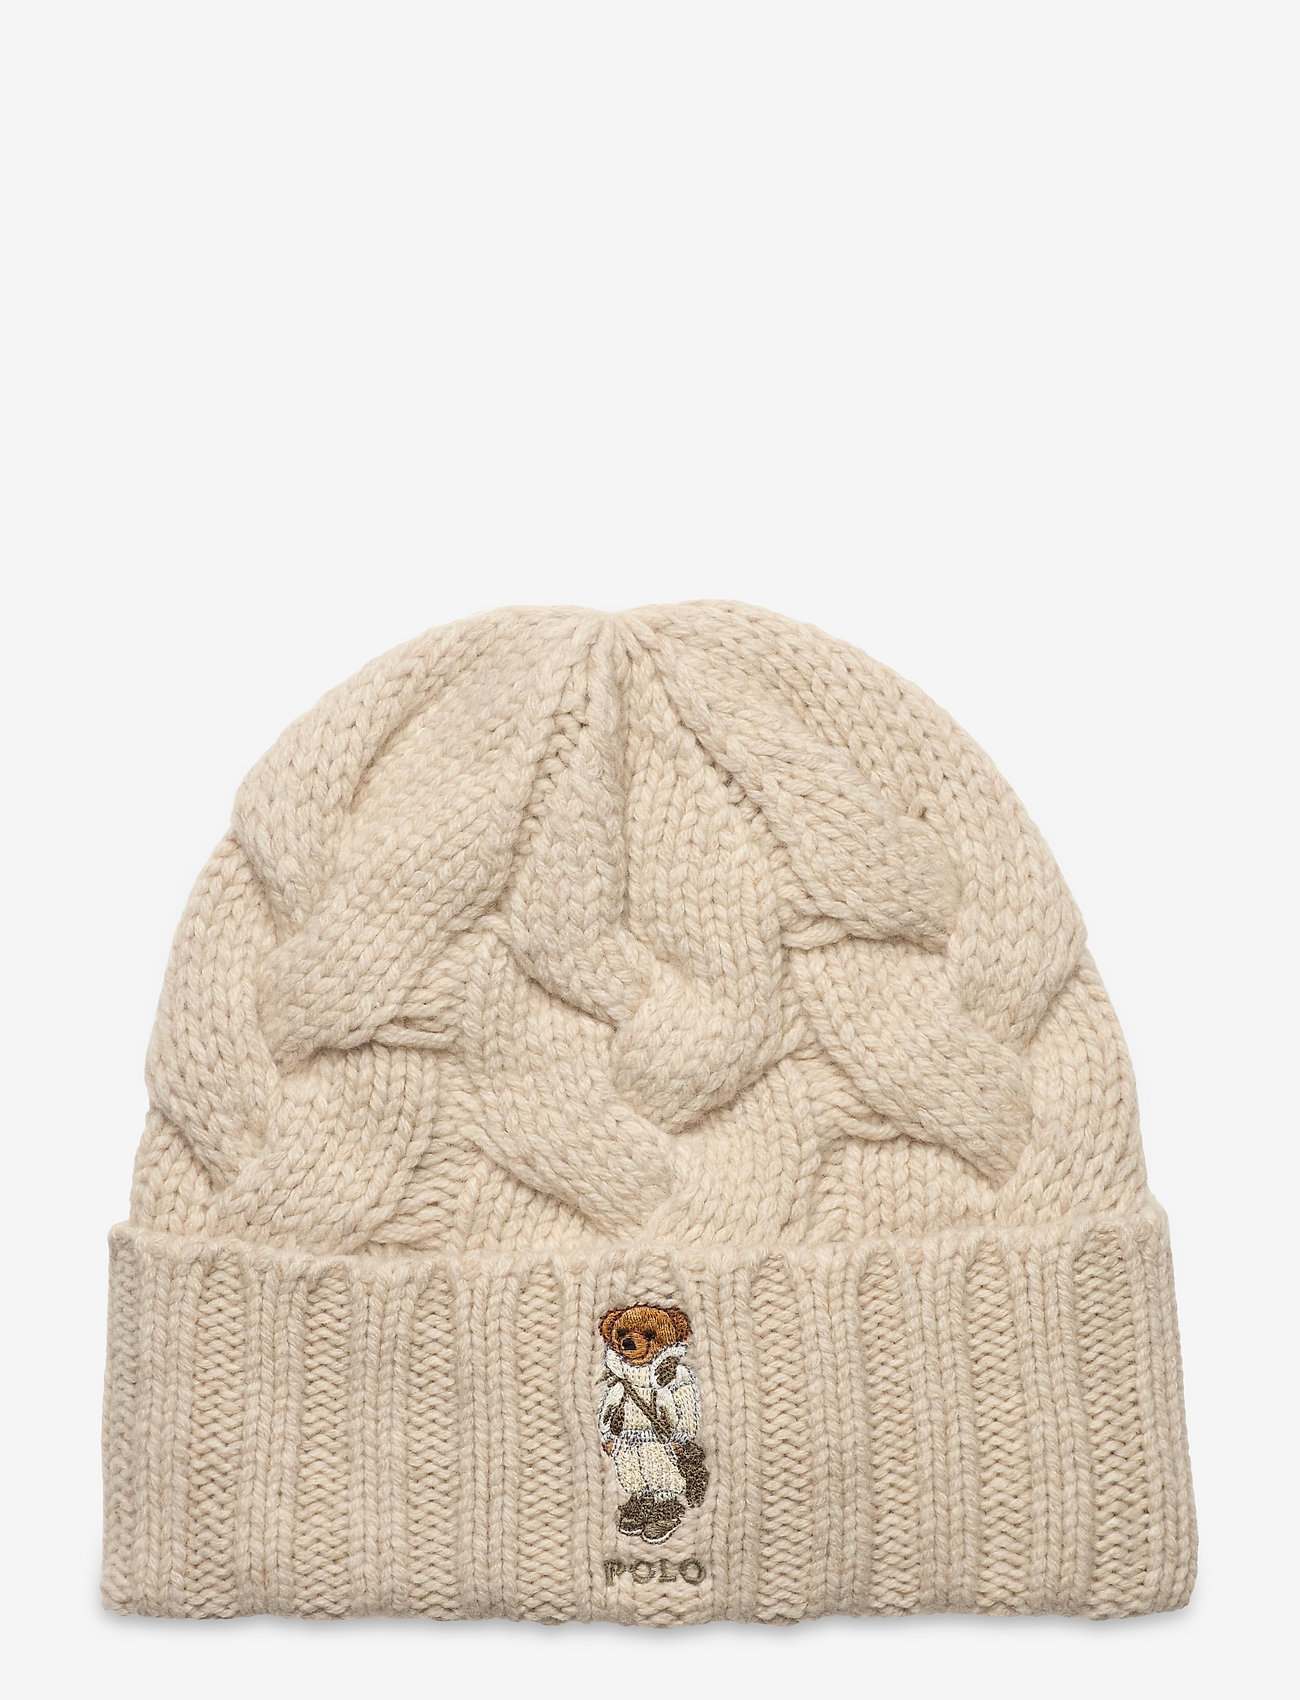 Mount Bank Compliment nabootsen Polo Ralph Lauren Shearling Polo Bear Cable-knit Hat - Hats | Boozt.com